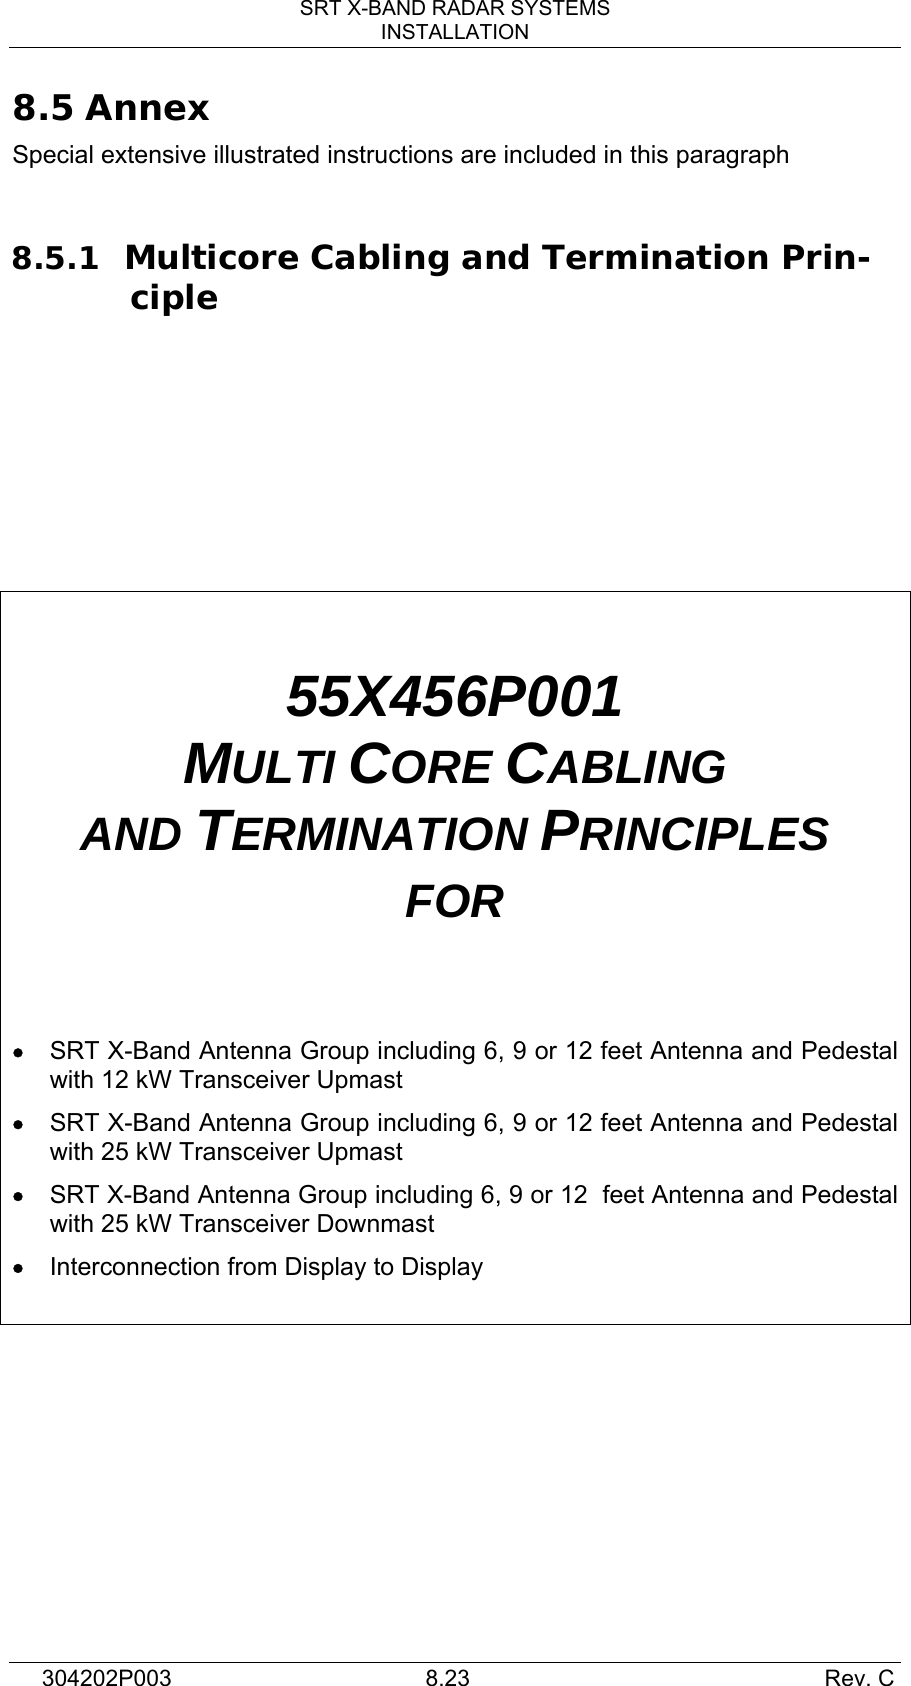 SRT X-BAND RADAR SYSTEMS INSTALLATION 304202P003  8.23     Rev. C 8.5 Annex Special extensive illustrated instructions are included in this paragraph  8.5.1 Multicore Cabling and Termination Prin-ciple       55X456P001 MULTI CORE CABLING AND TERMINATION PRINCIPLES FOR   • SRT X-Band Antenna Group including 6, 9 or 12 feet Antenna and Pedestal with 12 kW Transceiver Upmast • SRT X-Band Antenna Group including 6, 9 or 12 feet Antenna and Pedestal with 25 kW Transceiver Upmast • SRT X-Band Antenna Group including 6, 9 or 12  feet Antenna and Pedestal with 25 kW Transceiver Downmast • Interconnection from Display to Display     